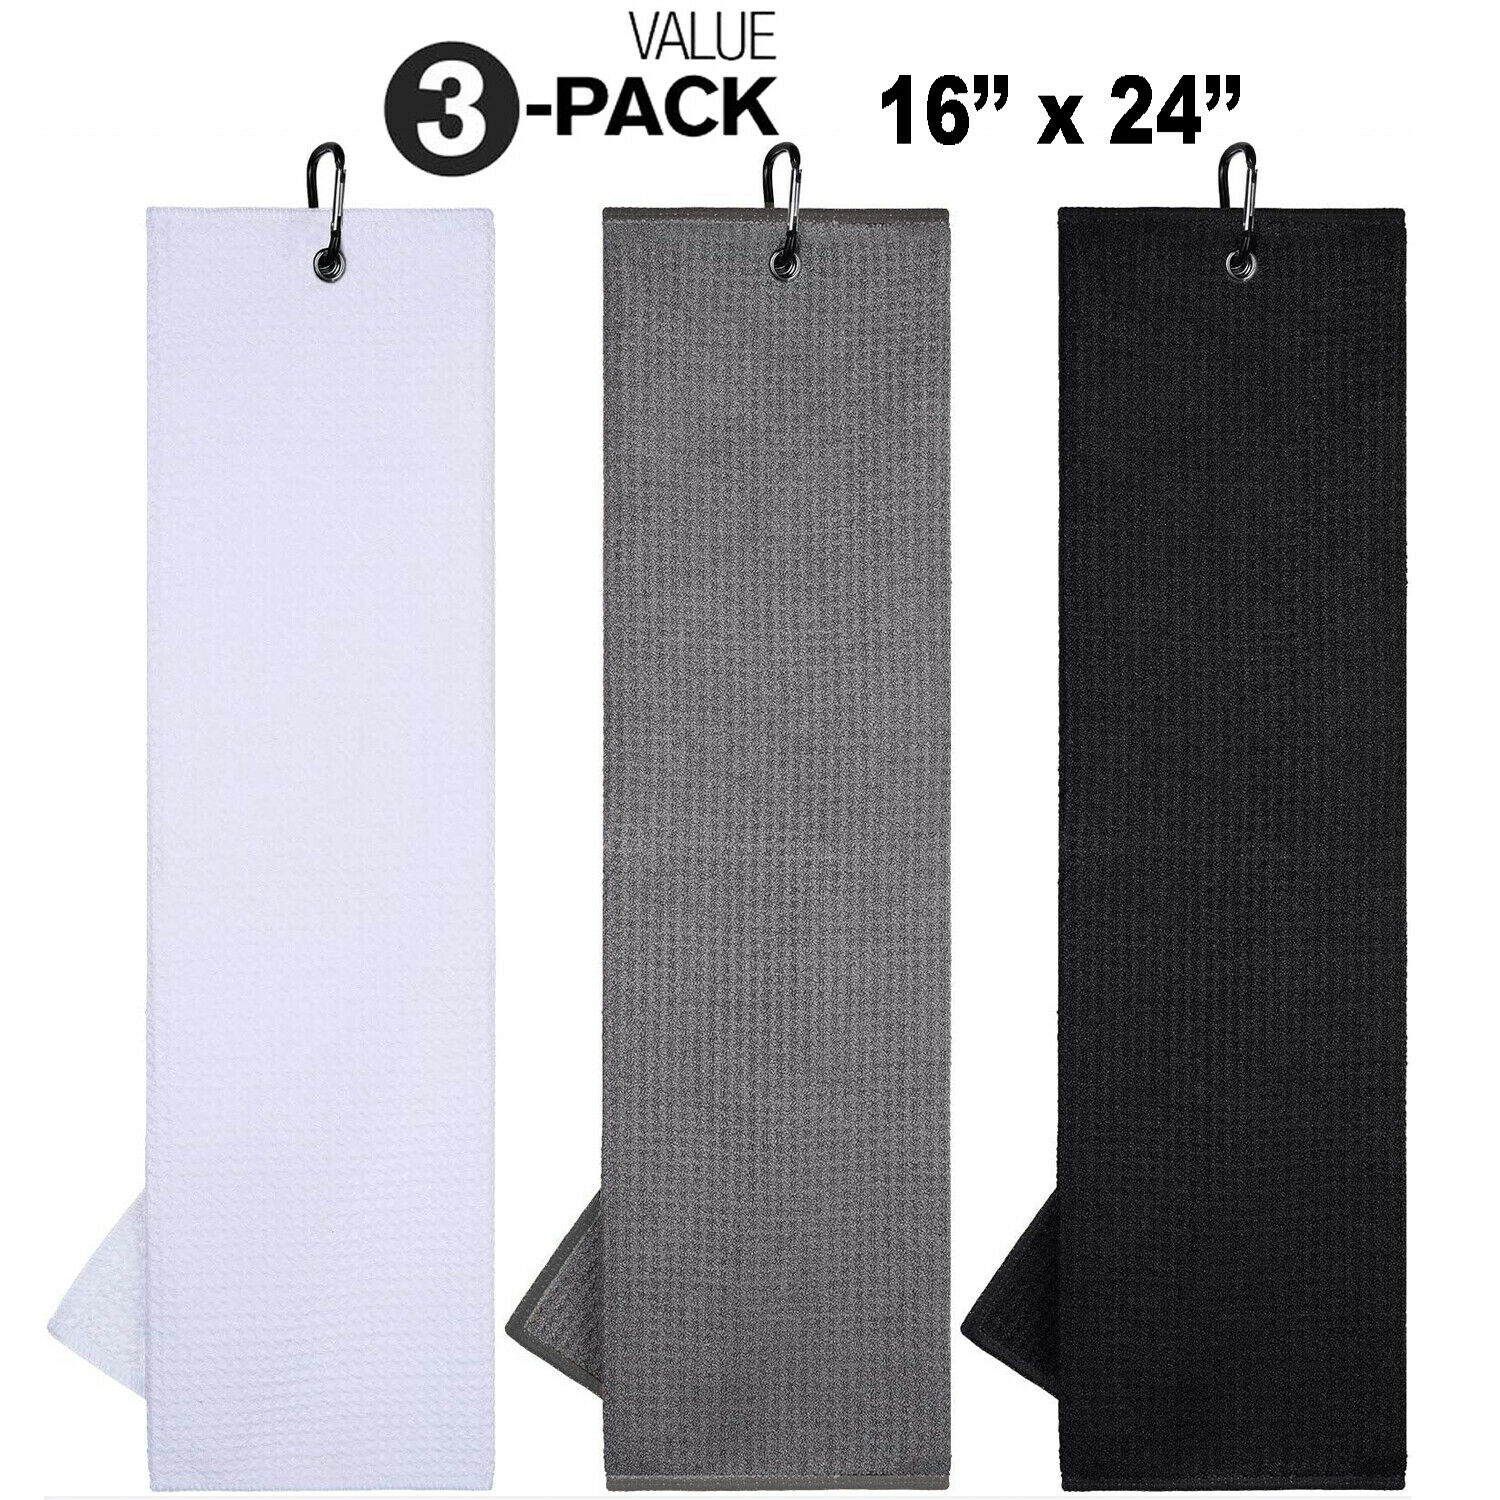 3 Pack Of Premium Colored Microfiber Golf Towels 16" X 24" With Carabiner Clip